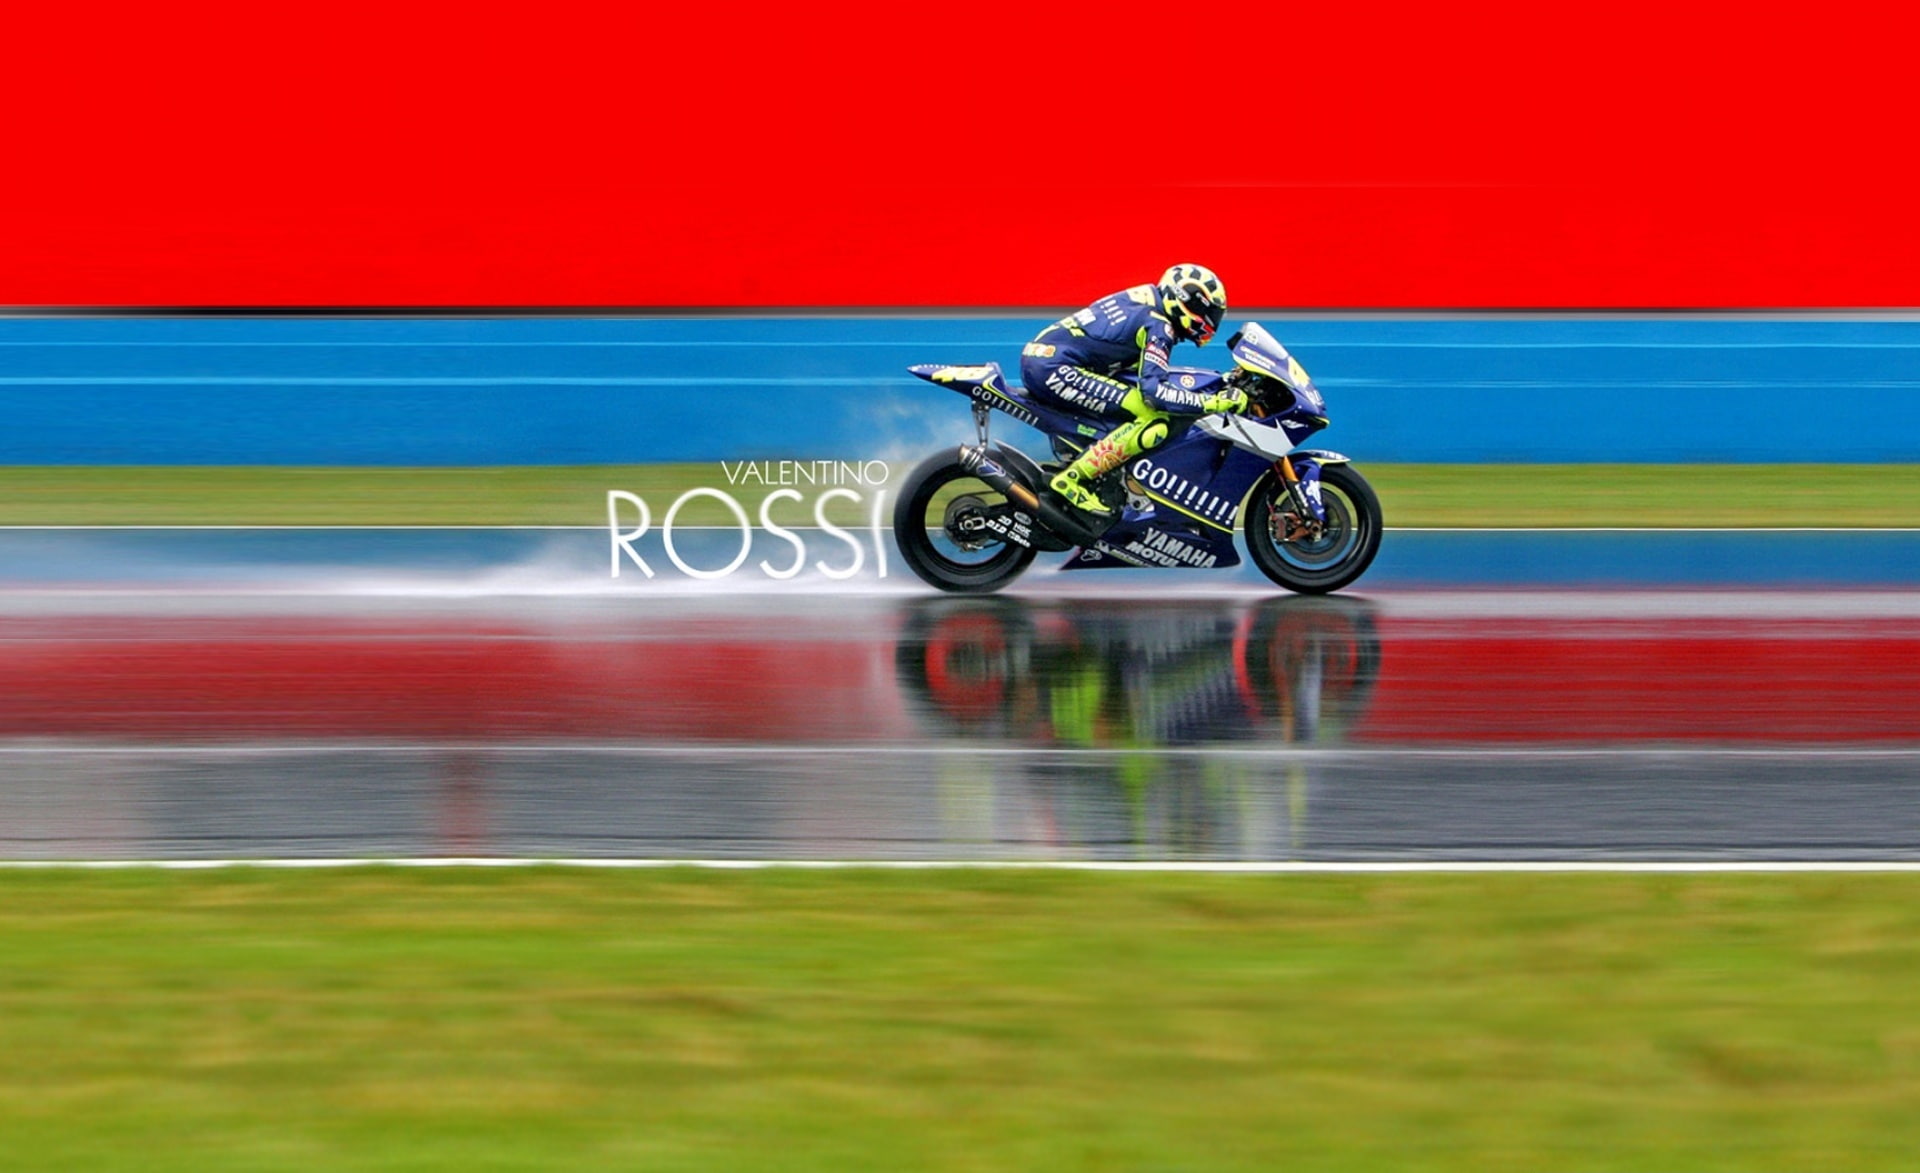 Valentino Rossi, Sports, Motorcycle Racing, motogp, speed, blurred motion